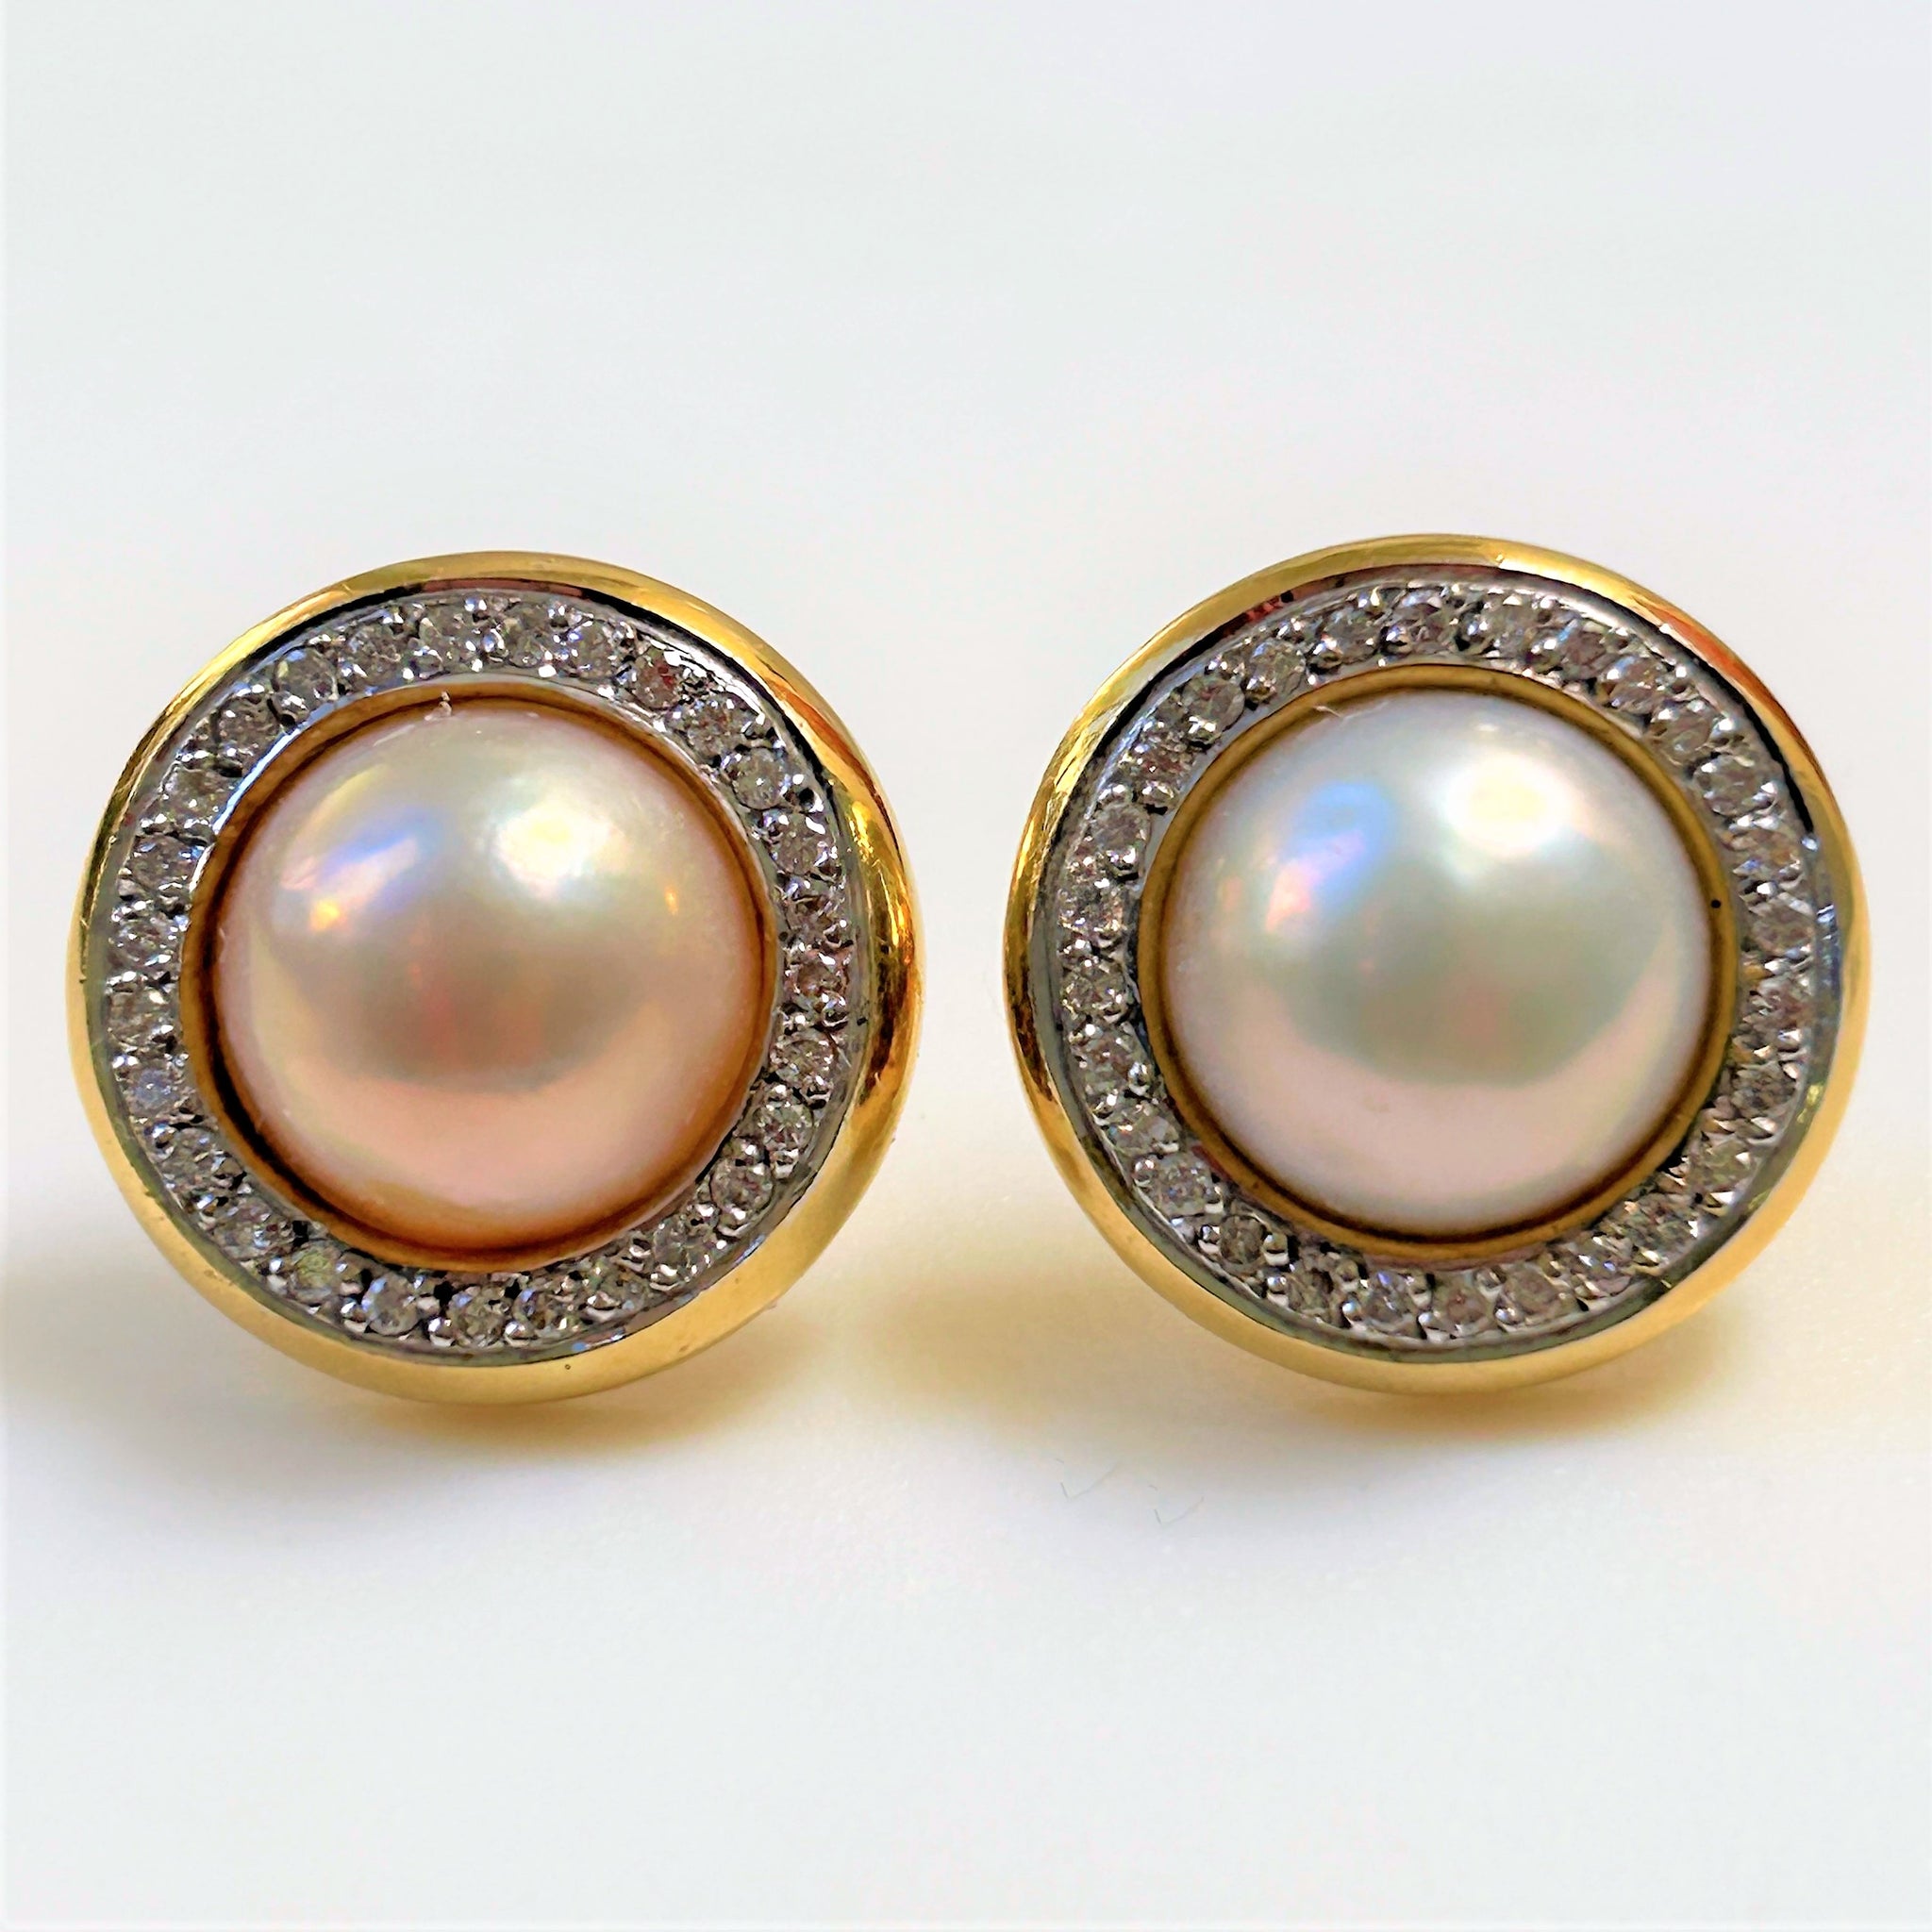 Large 18ct Gold, Diamond and Mabe Pearl Earrings